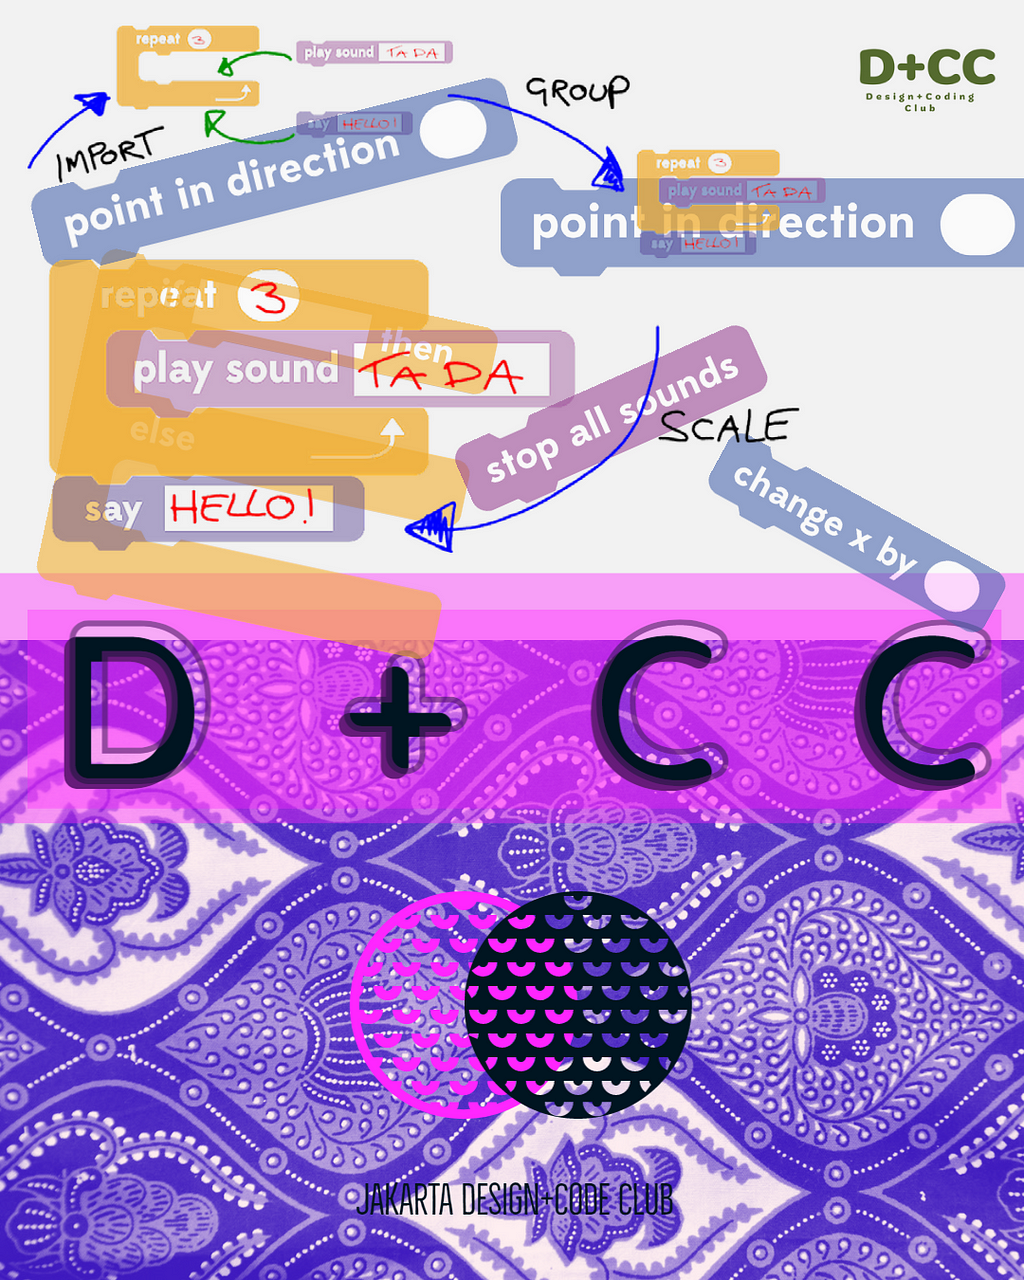 A multicolored poster for the Design+Coding Club with a green text logo in the top right hand corner. The top half contains assorted blue, purple and orange scratch coding blocks along with arrows and handwritten words such as scale, group and import around them. The thin middle layer shows the text “D+CC” in large black letters on a pink background. The bottom half is a blue Batik background with 2 circular designs, one black and the other pink, above the words “Jakarta Design+Coding Club”.